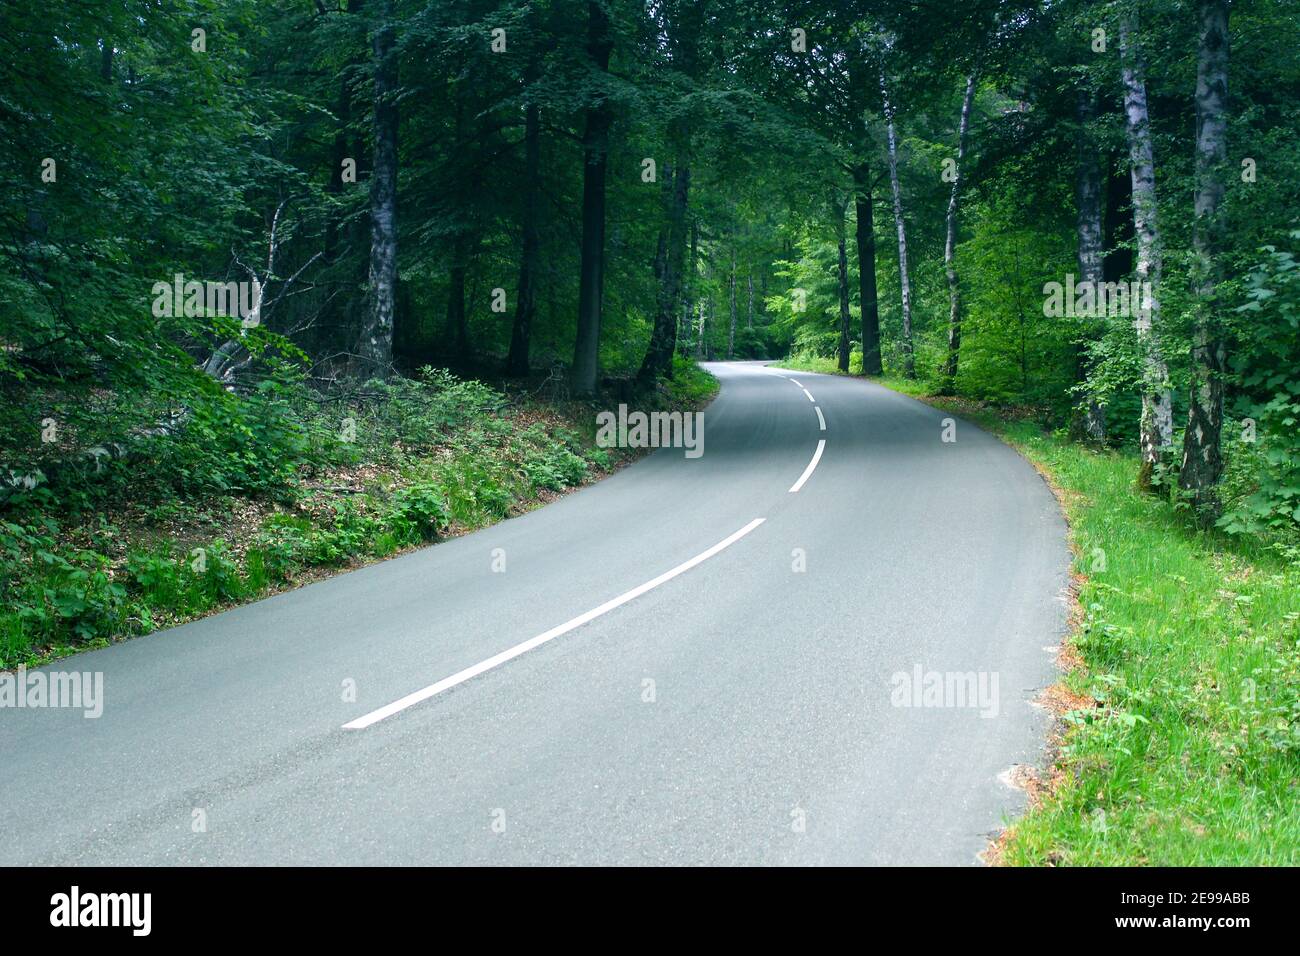 The winding road named 'Beekhuizenseweg' in the Dutch forest 'Veluwe' near the city Arnhem, The Netherlands. Stock Photo